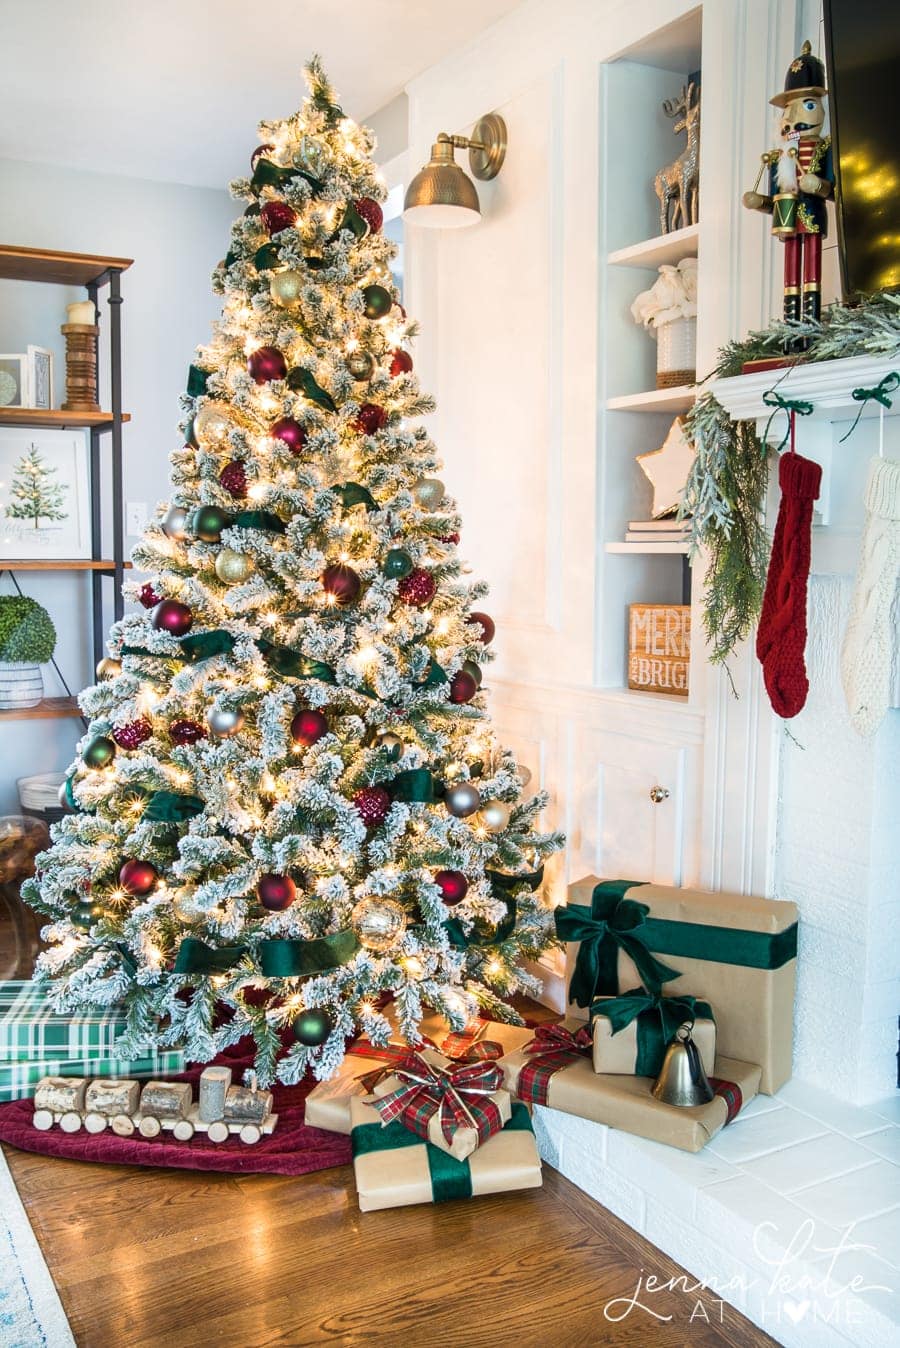 The Christmas tree with burgundy ornaments and green ribbon and the presents below, wrapped in kraft paper and burgundy/green ribbon